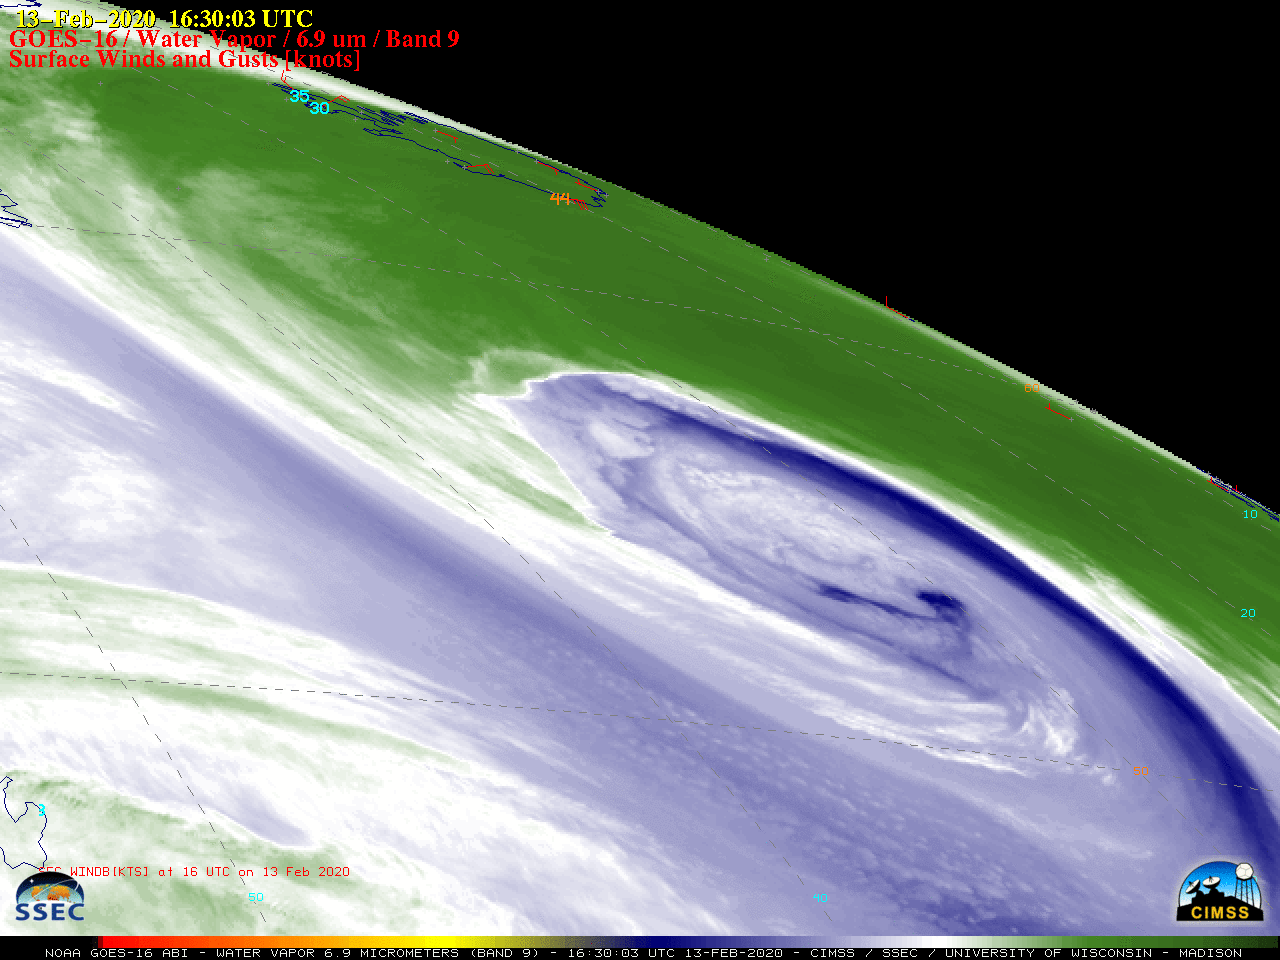 GOES-16 Mid-level Water Vapor (6.9 µm) images, with plots of hourly surface wind barbs and gusts (in knots) [click to play animation | MP4]